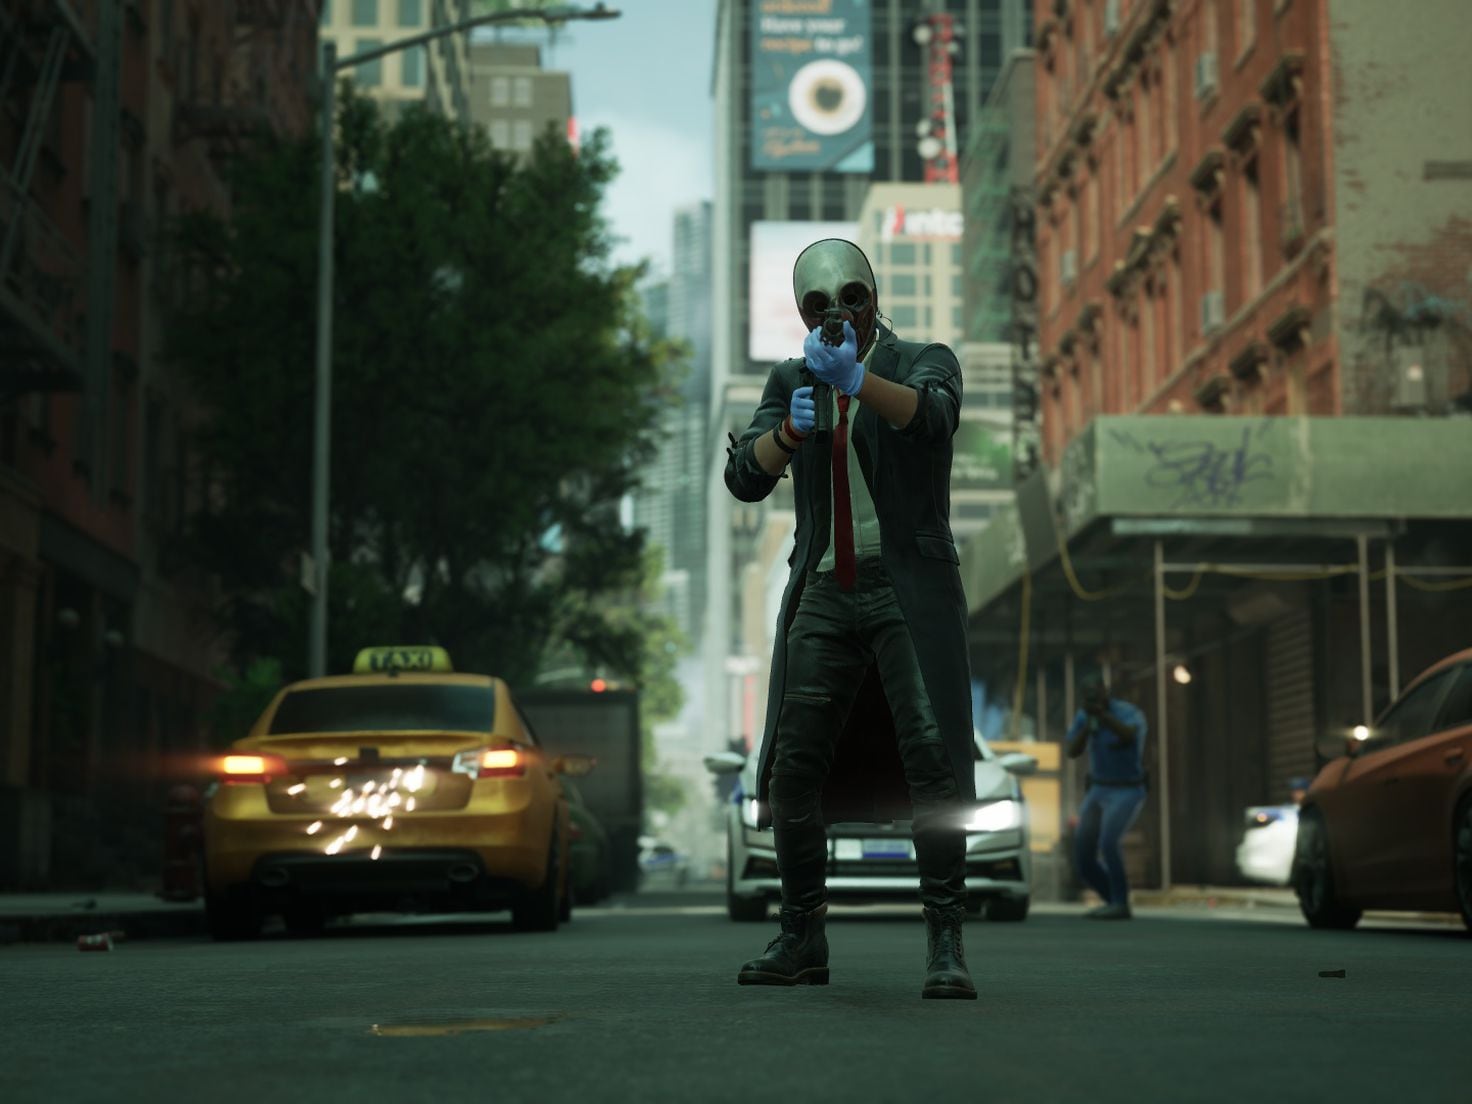 Payday 3 release date, open beta, trailers, gameplay, story, and more